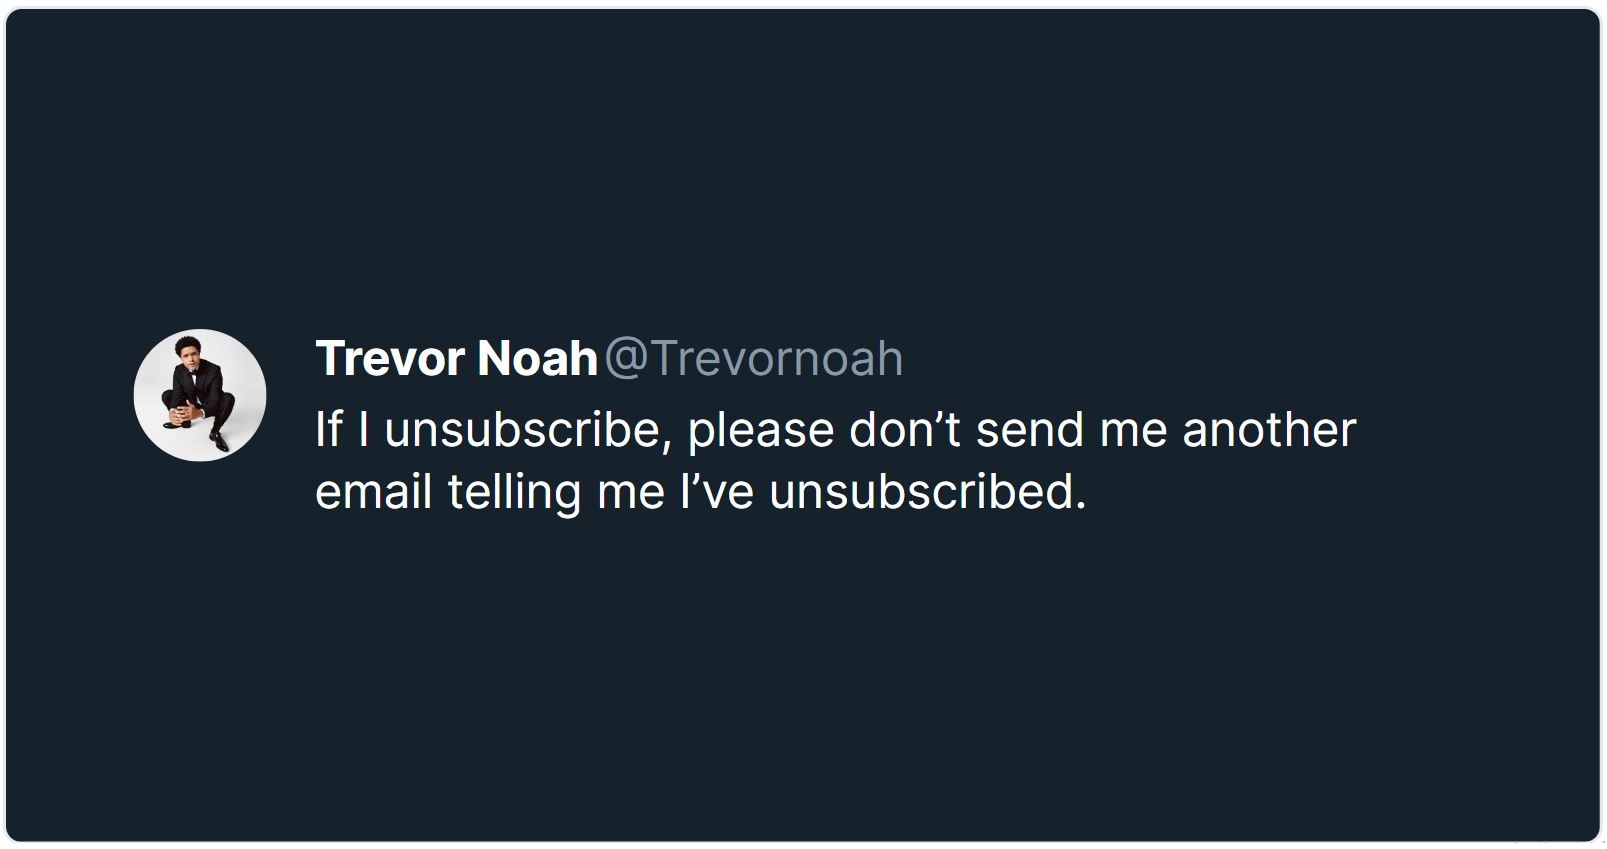 Don't send unsubscribe confirmation email